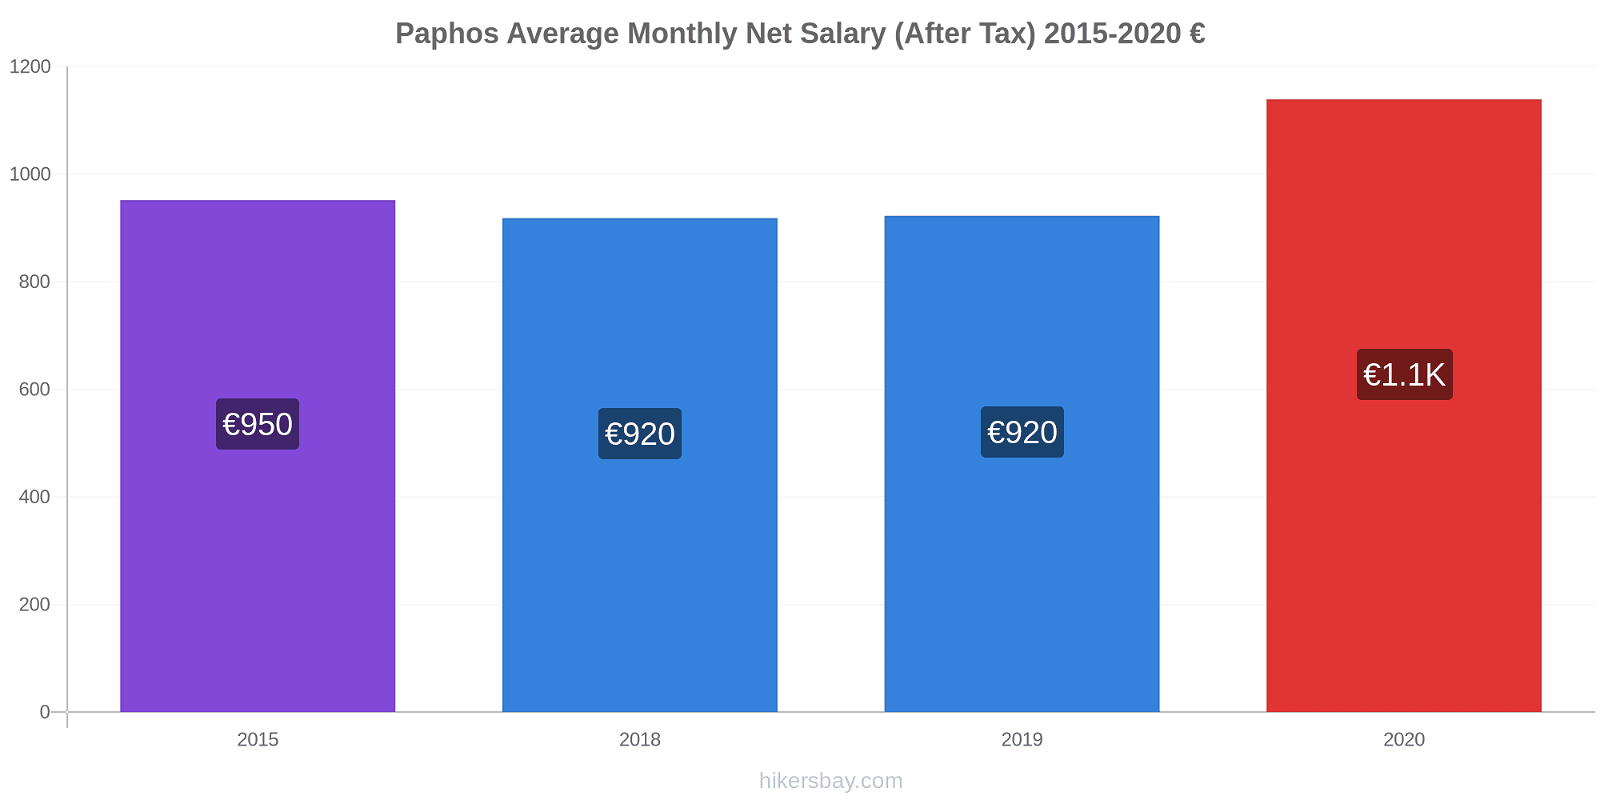 Paphos price changes Average Monthly Net Salary (After Tax) hikersbay.com